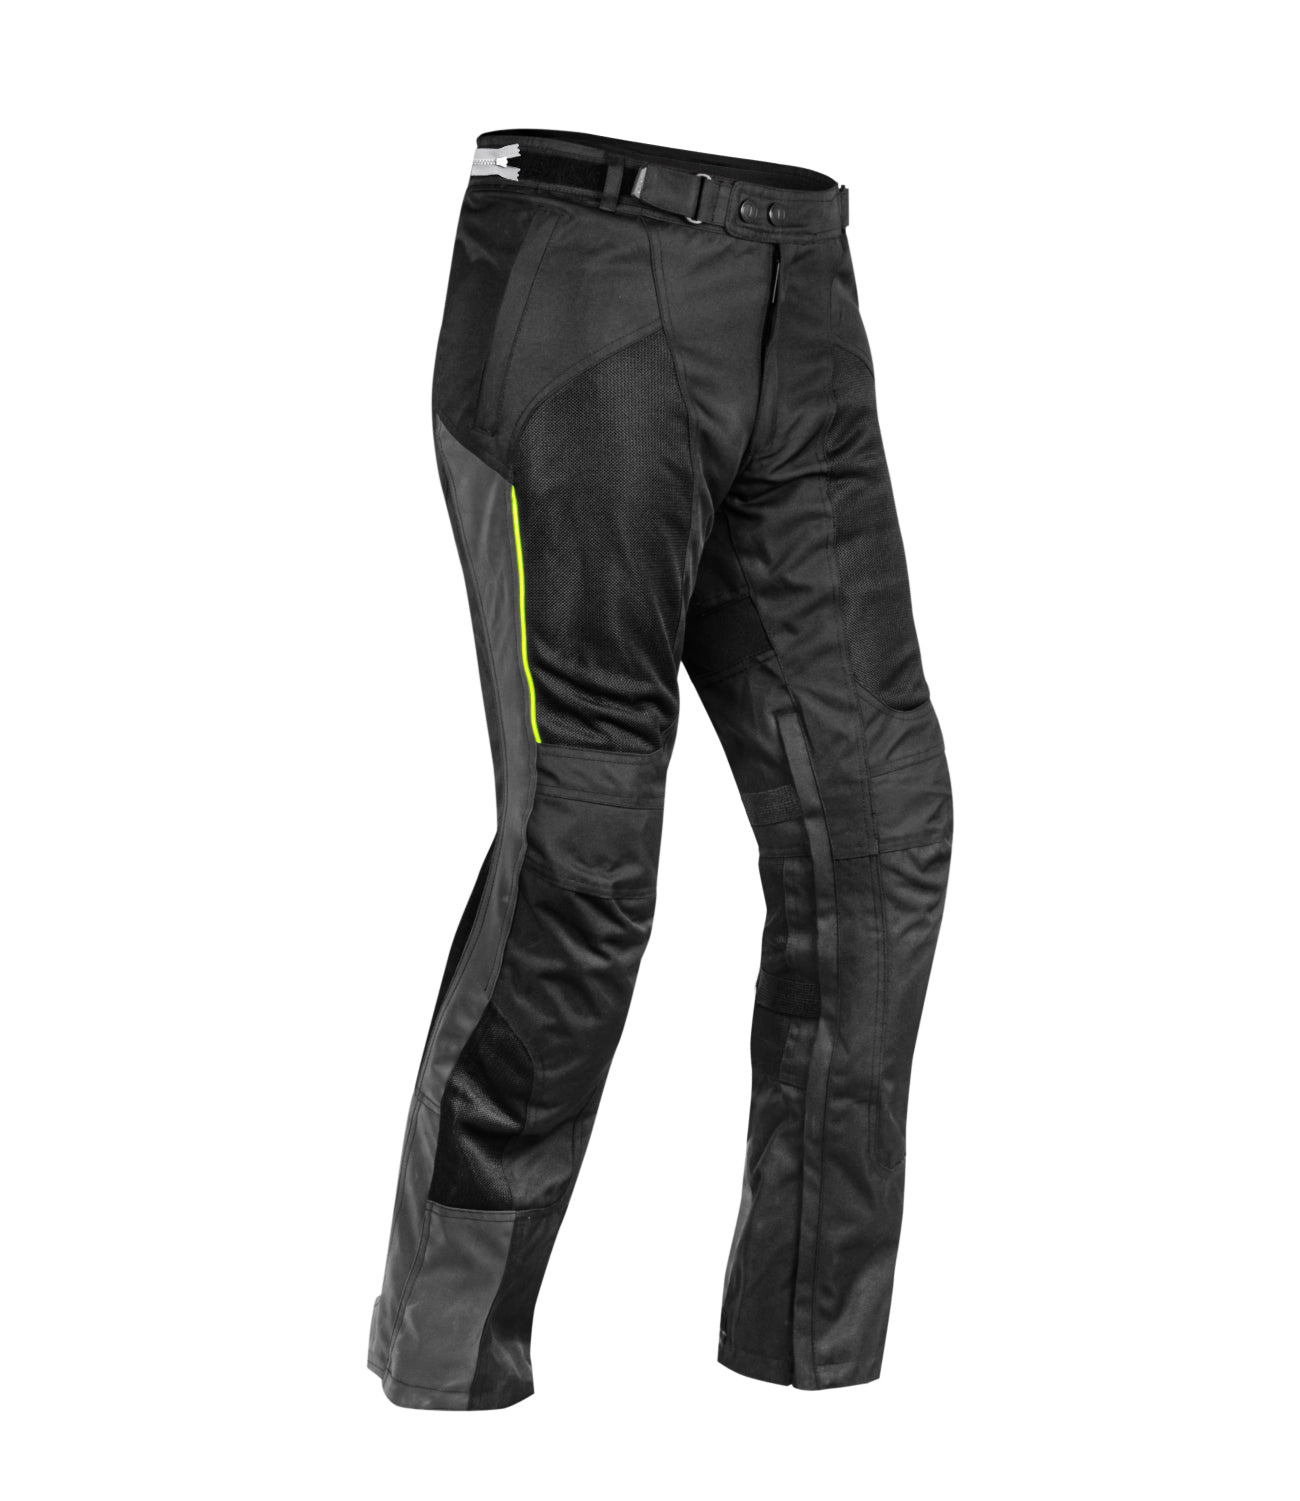 Airbag Jeans - Game Changer for Motorcycle Safety -